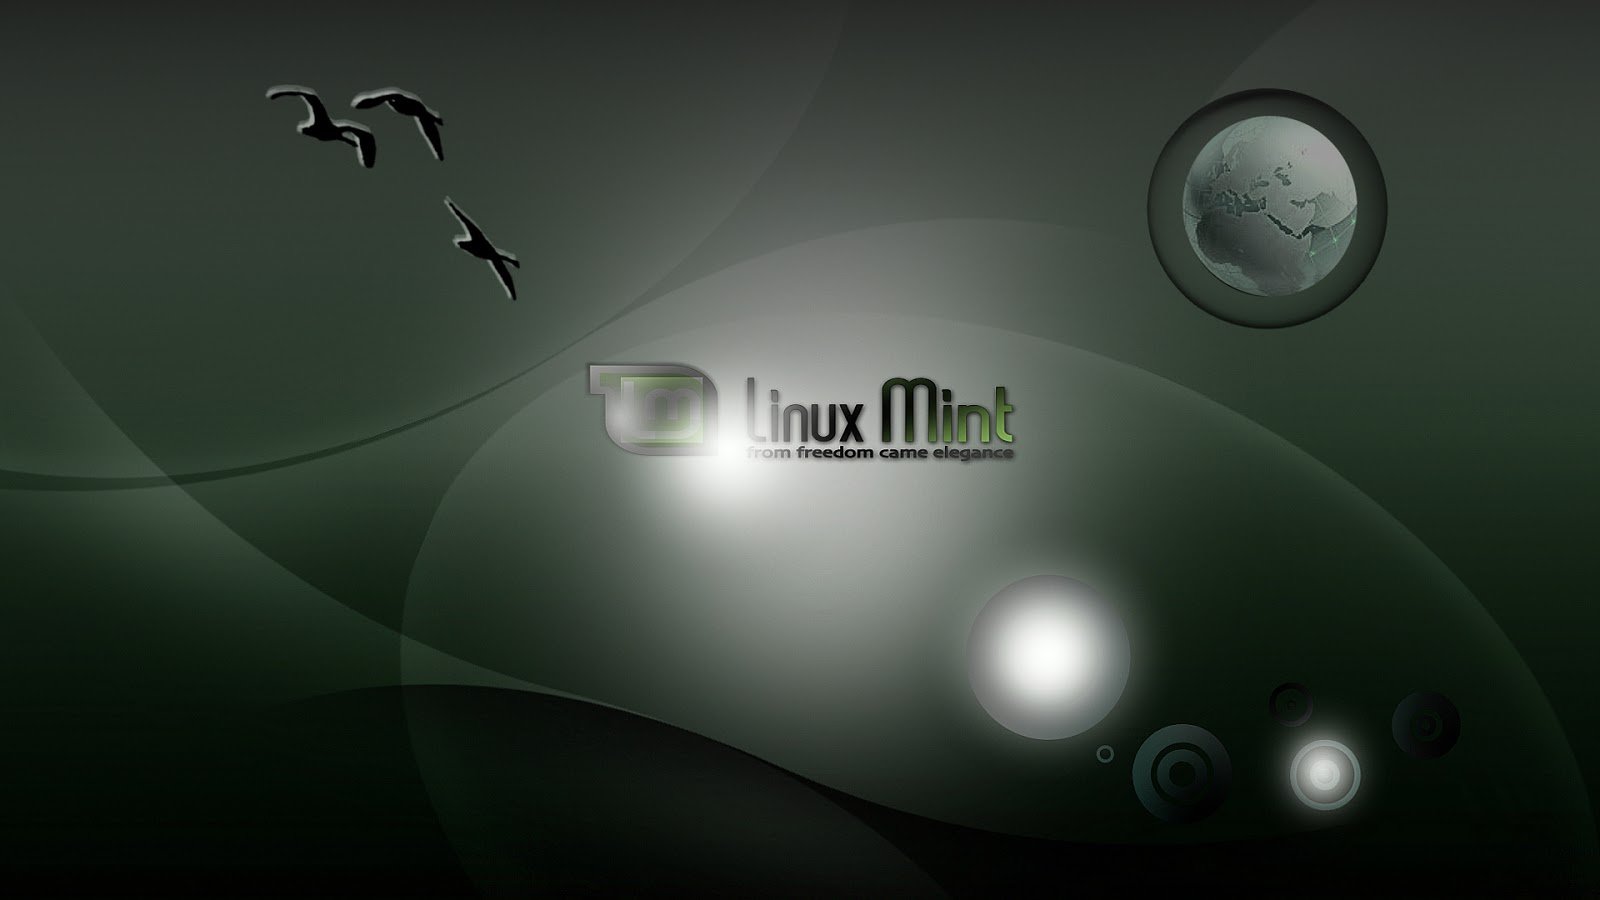 Get The Latest Linux Mint Wallpapers By Sakasa 1920x1080 Graphics